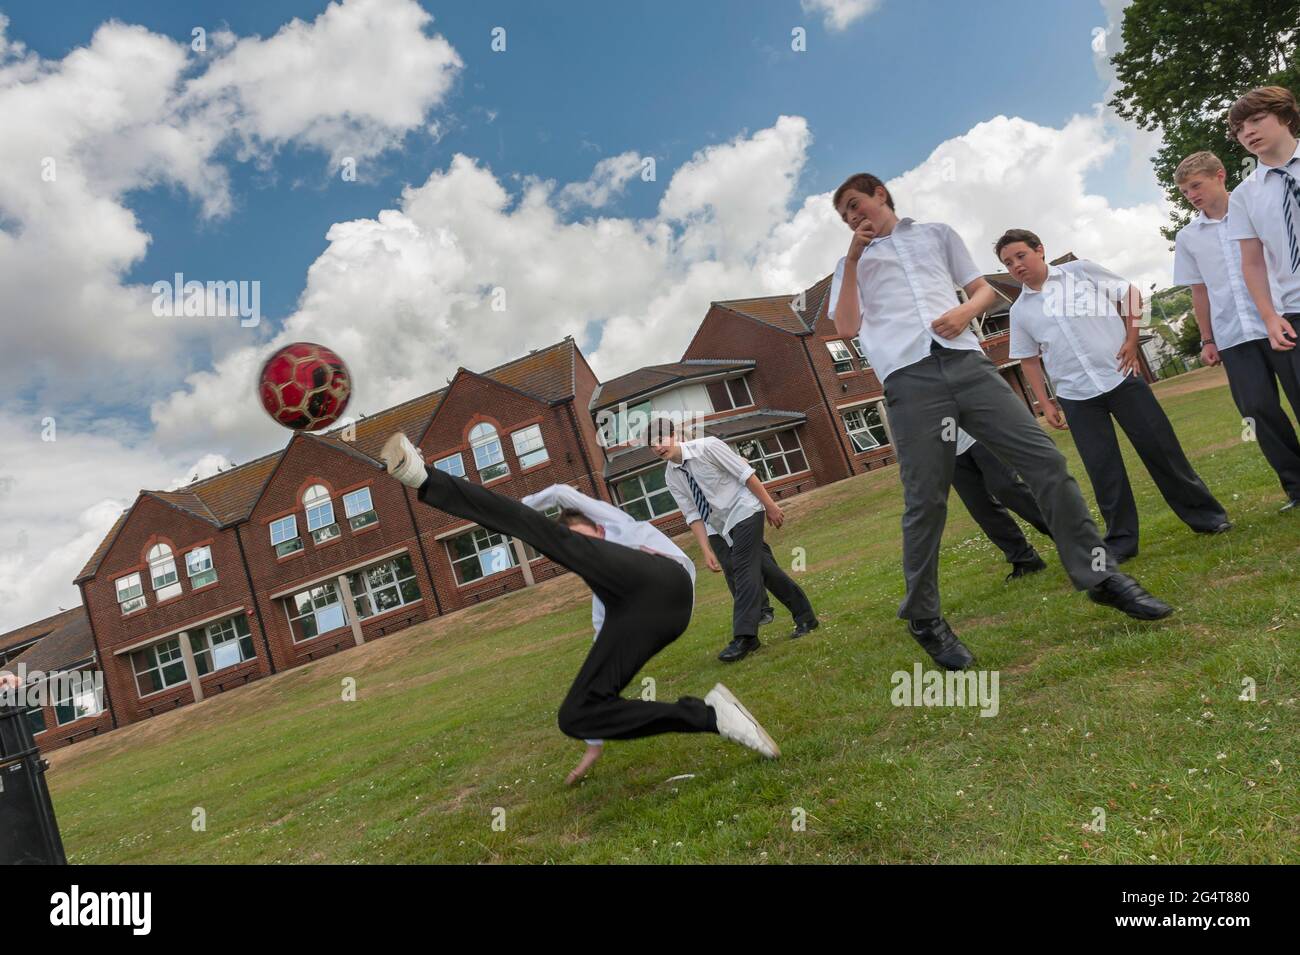 Schoolboys playing football, soccer, at breaktime, lunchtime, England, UK Stock Photo